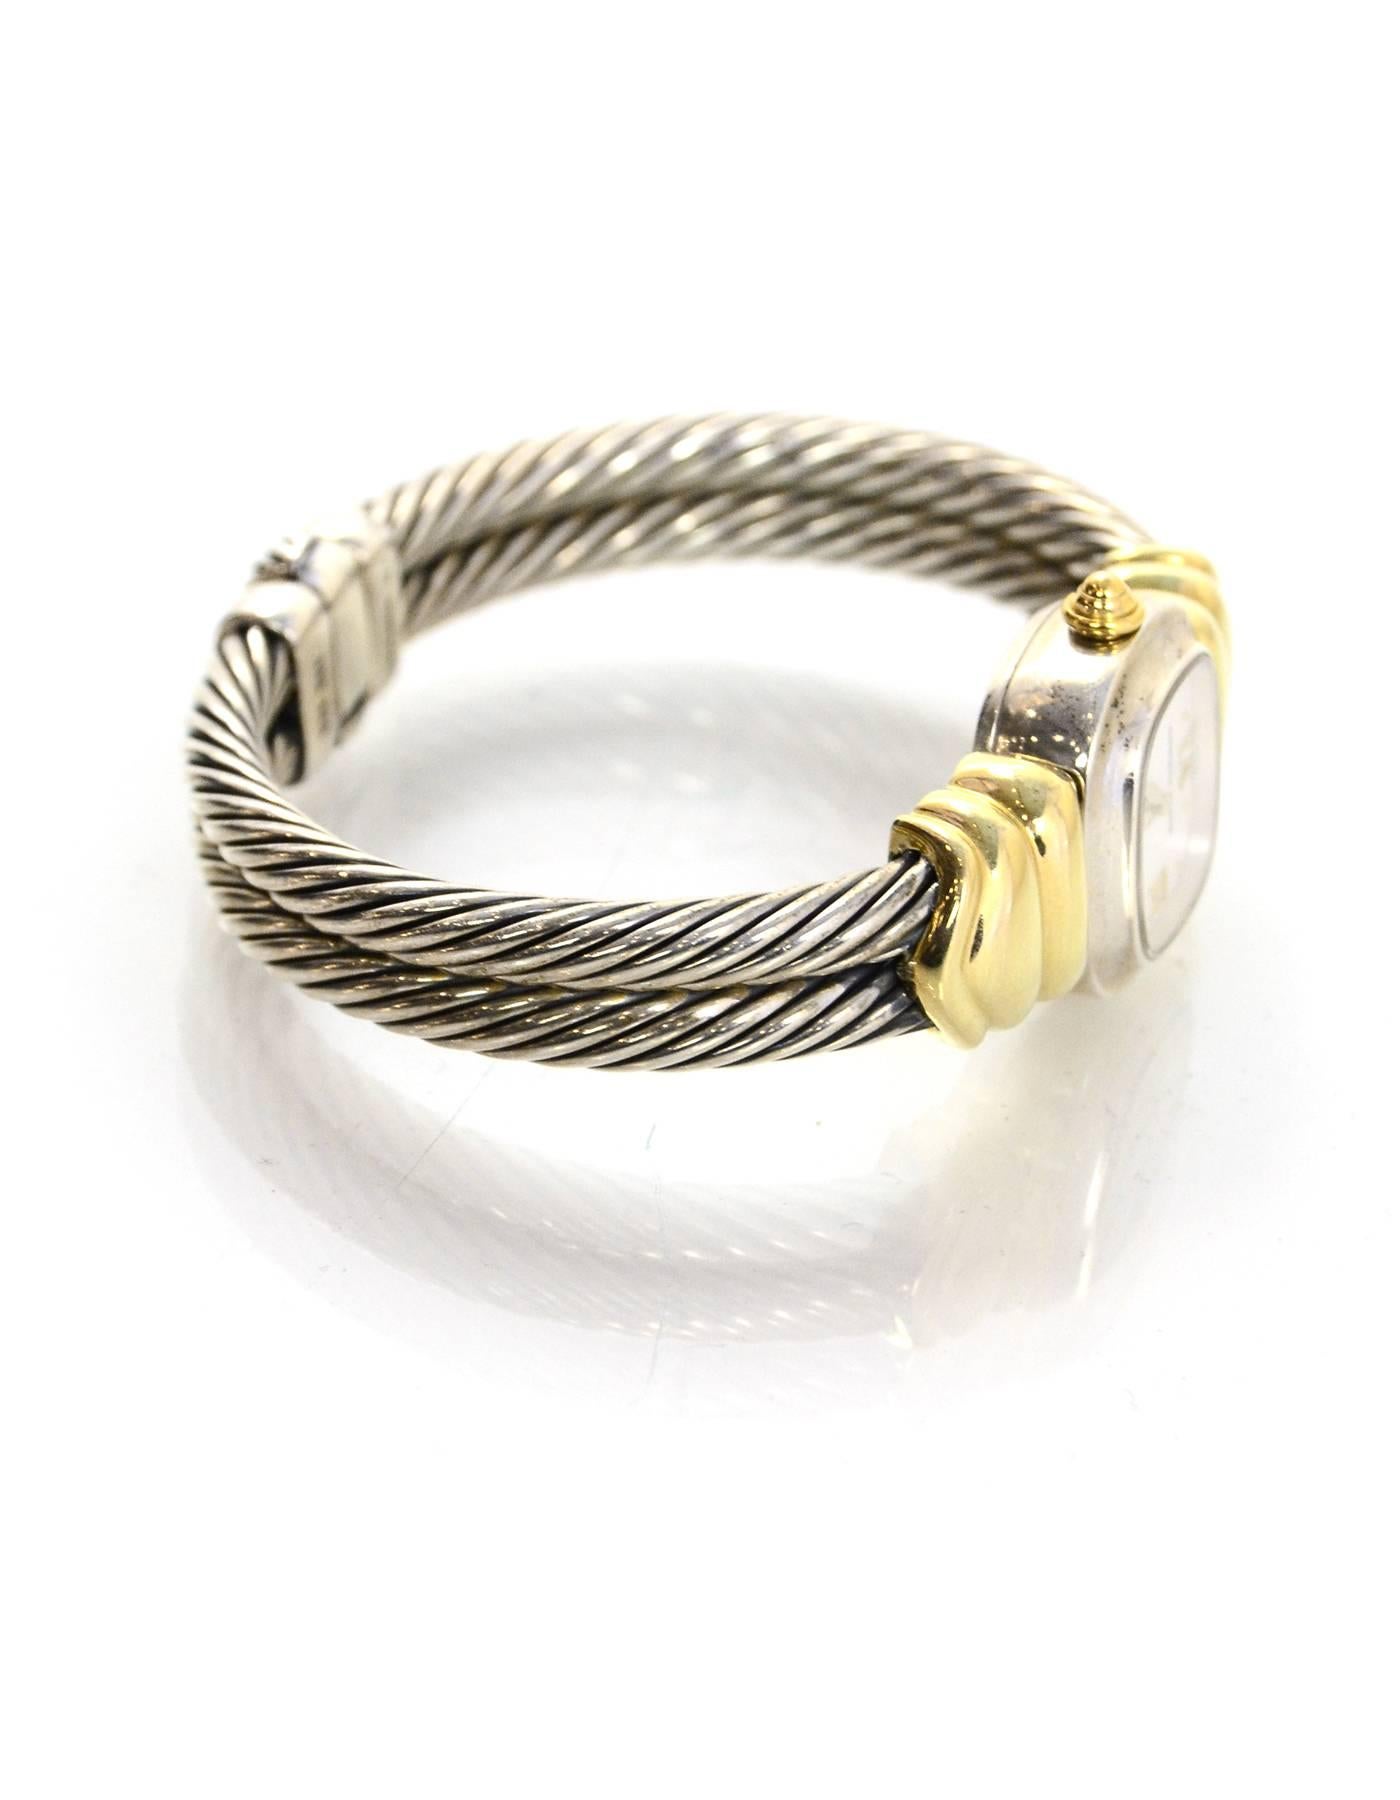 David Yurman Sterling & 14k Double Cable Watch

Made In: Switzerland
Color: Silver and gold
Materials: Sterling silver and 14k gold
Closure: Lift lever
Stamp: Band- 925 585 Face- Swiss Made 925 David Yurman T-51720 Q
Movement: Quartz